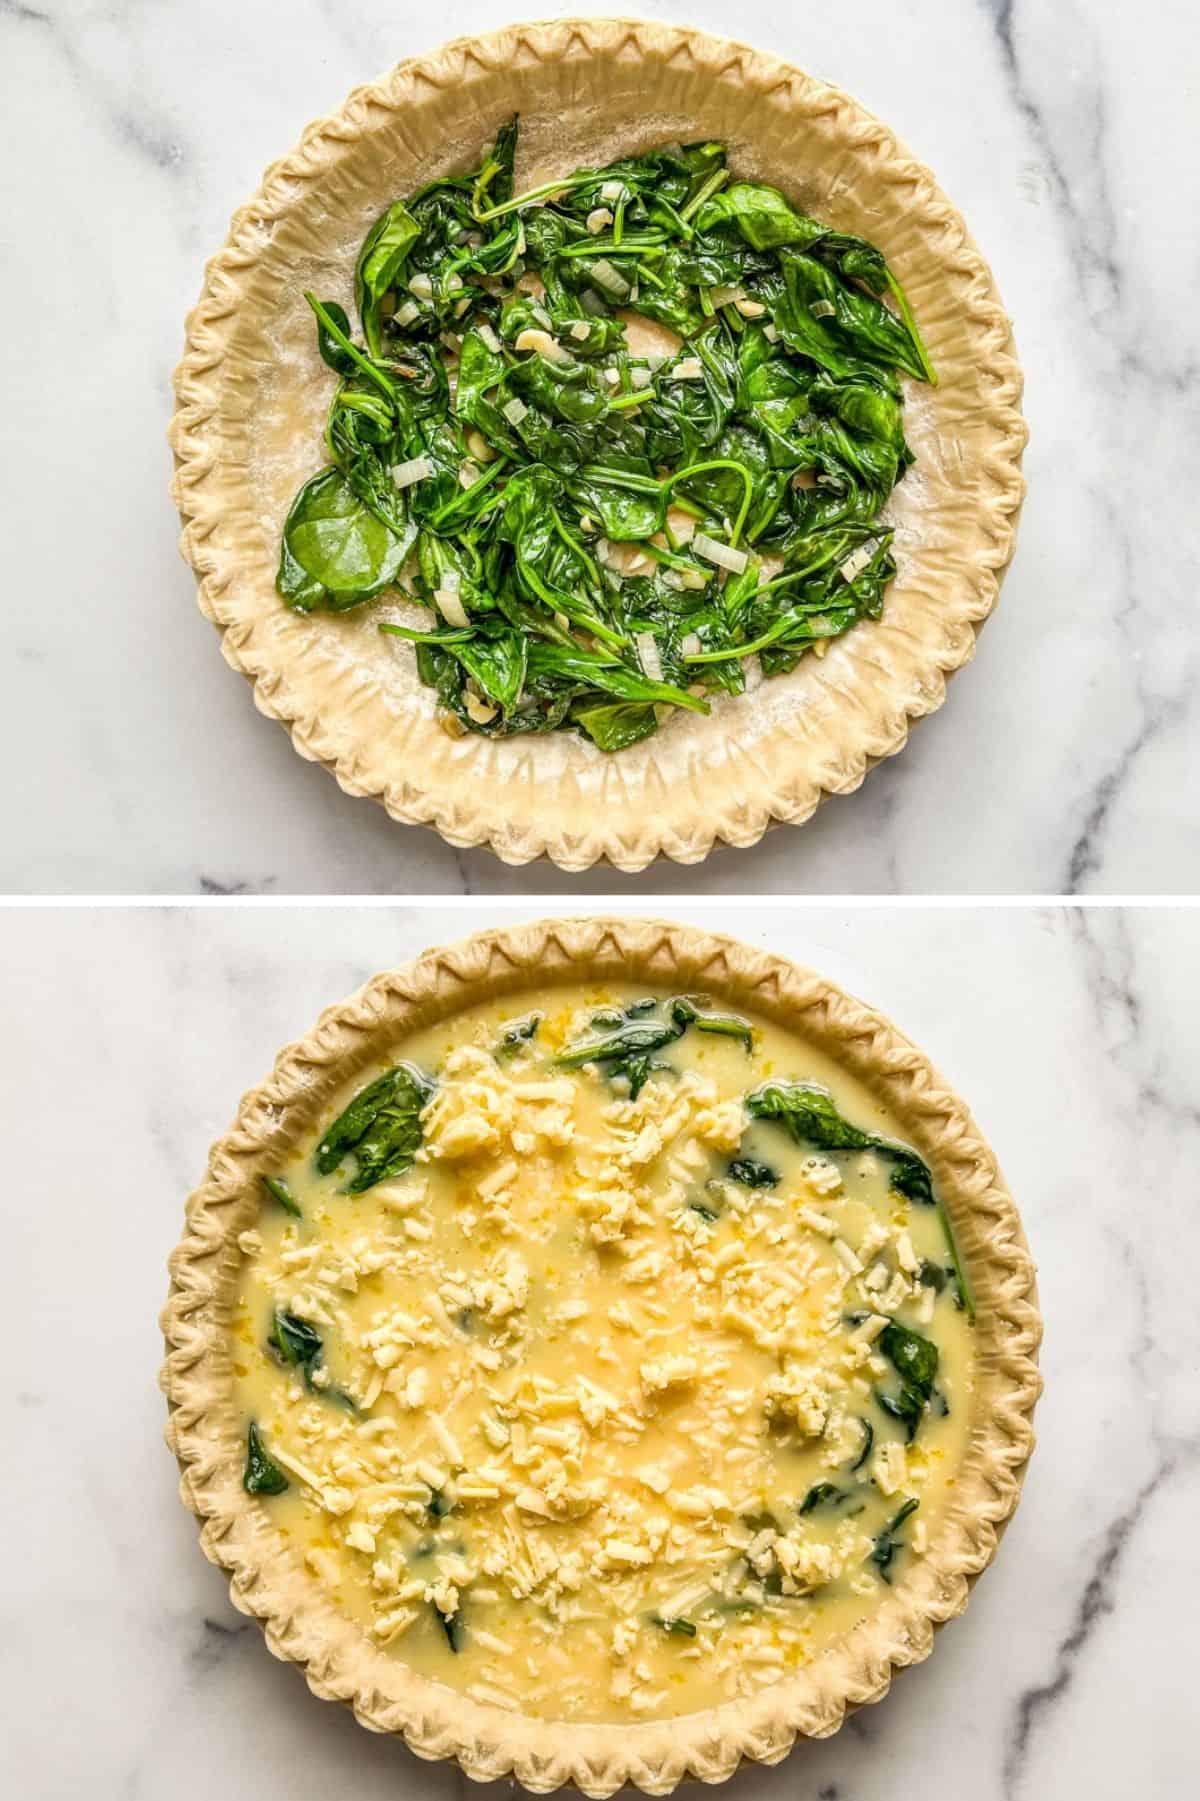 Two photos showing the preparation of a duck egg quiche.